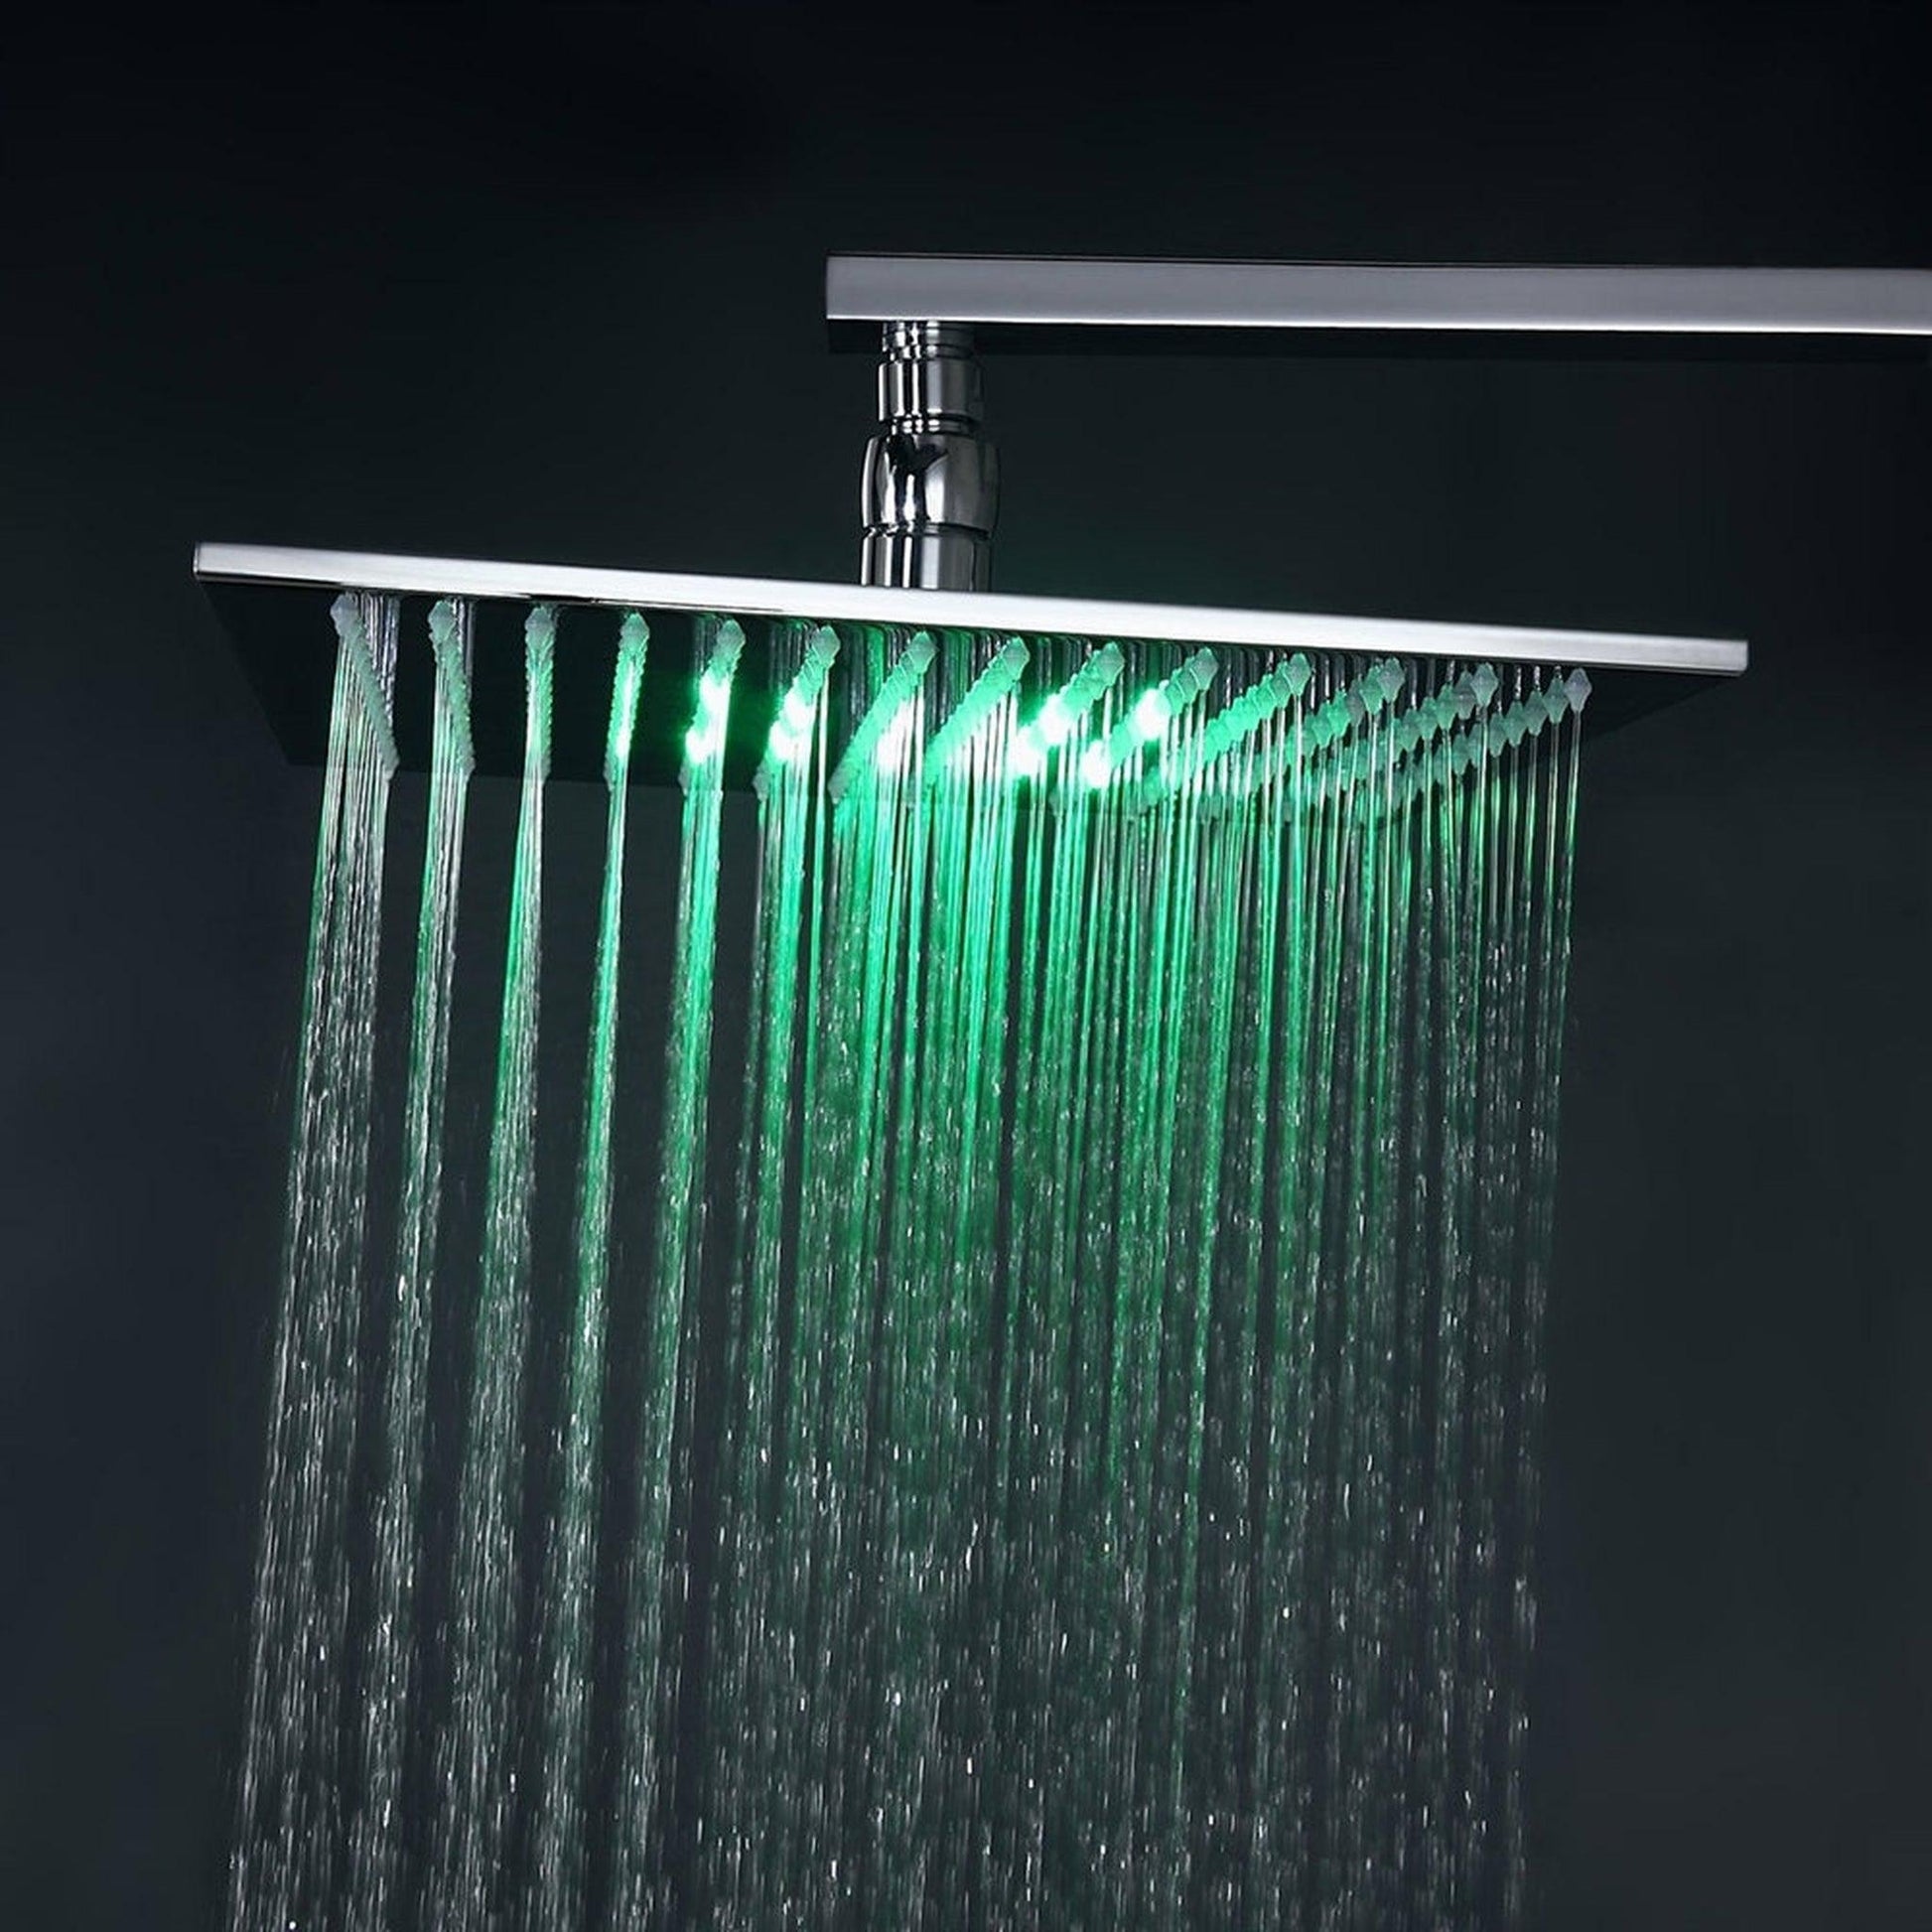 Fontana Trialo 12" Polished Chrome Square Wall-Mounted Color Changing LED Shower System With Regular Mixer, Adjustable 6-Body Jets and Hand Shower